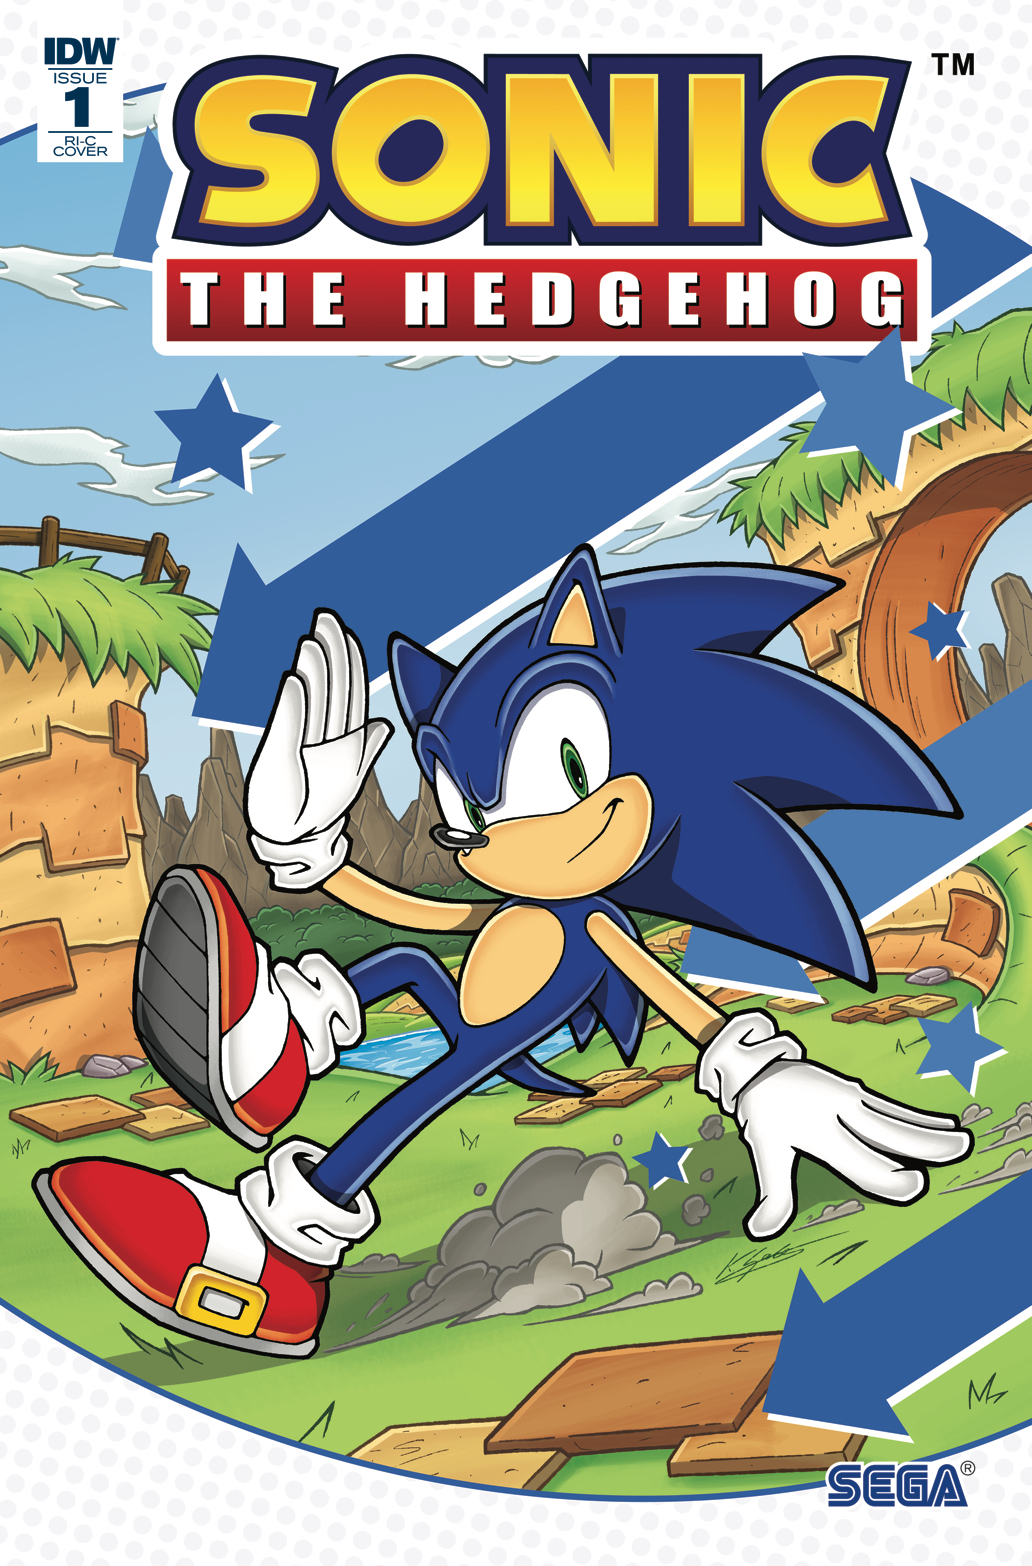 Idw sonic issue 1